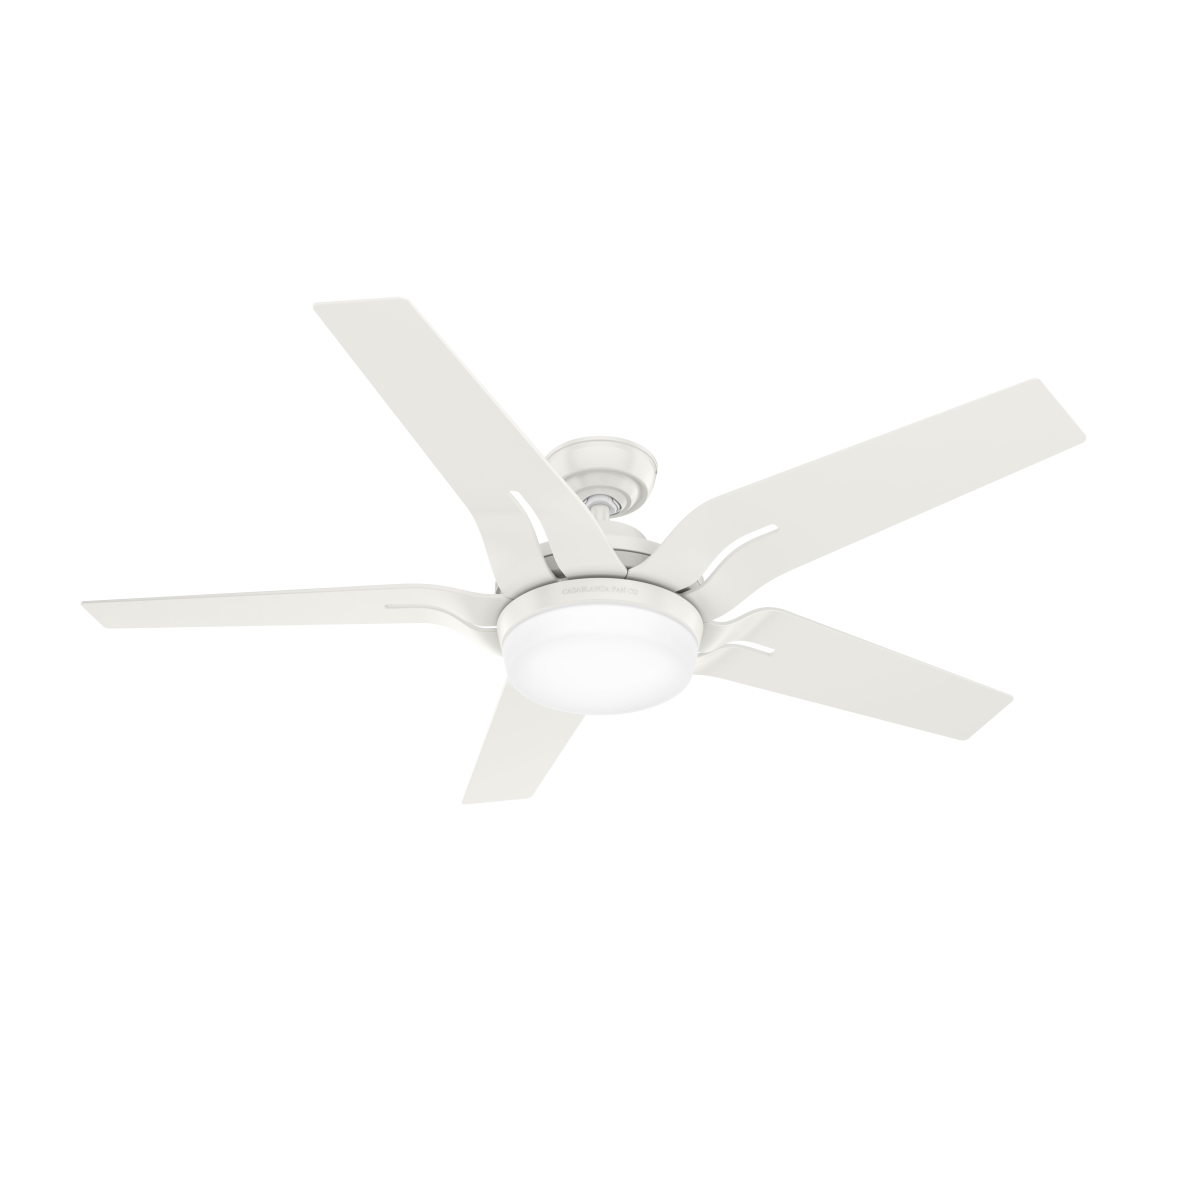 Picture of Casablanca 51741 56 in. Correne Fresh White Ceiling Fan with LED Light Kit & Handheld Remote